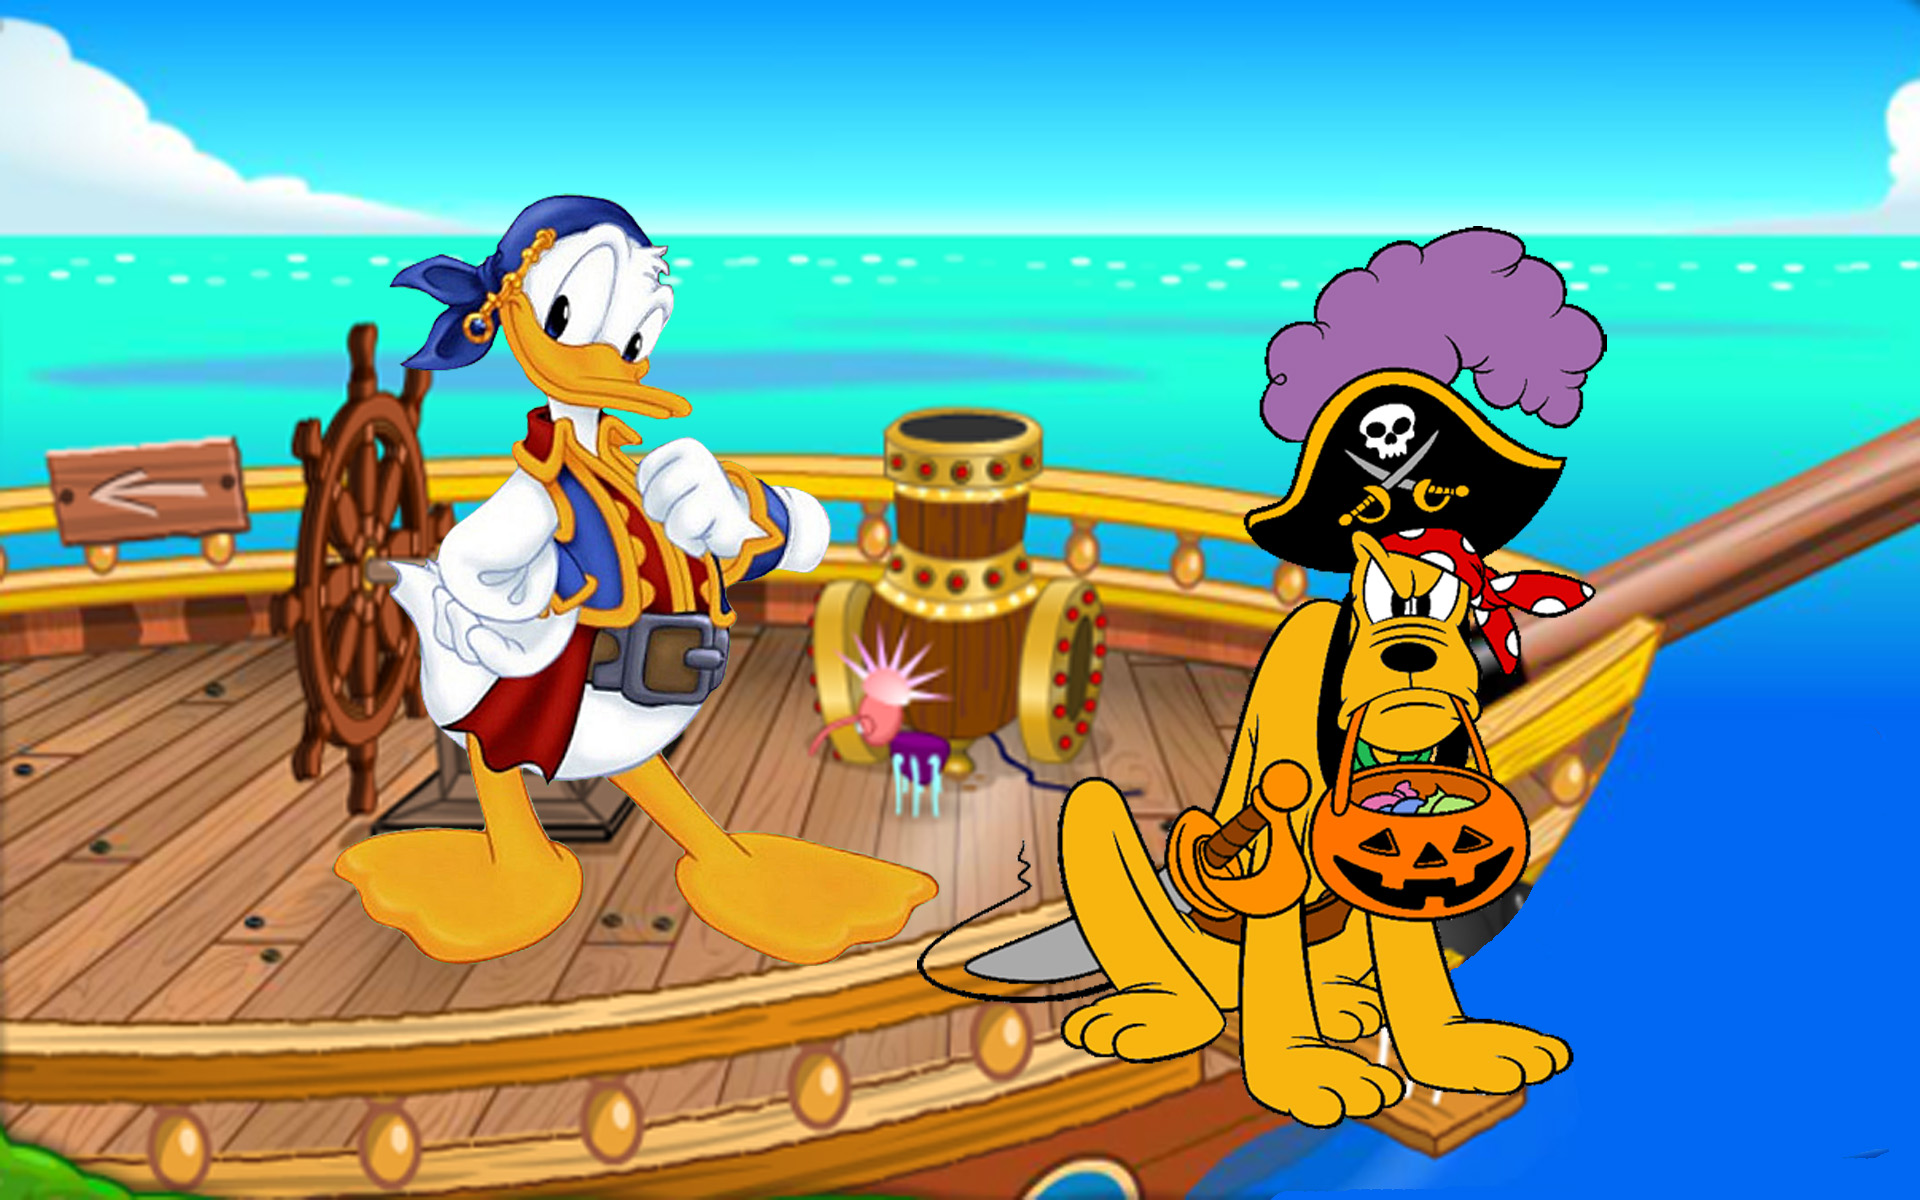 Cartoon Donald Duck And Pluto In A New Adventure As Pirates Hd